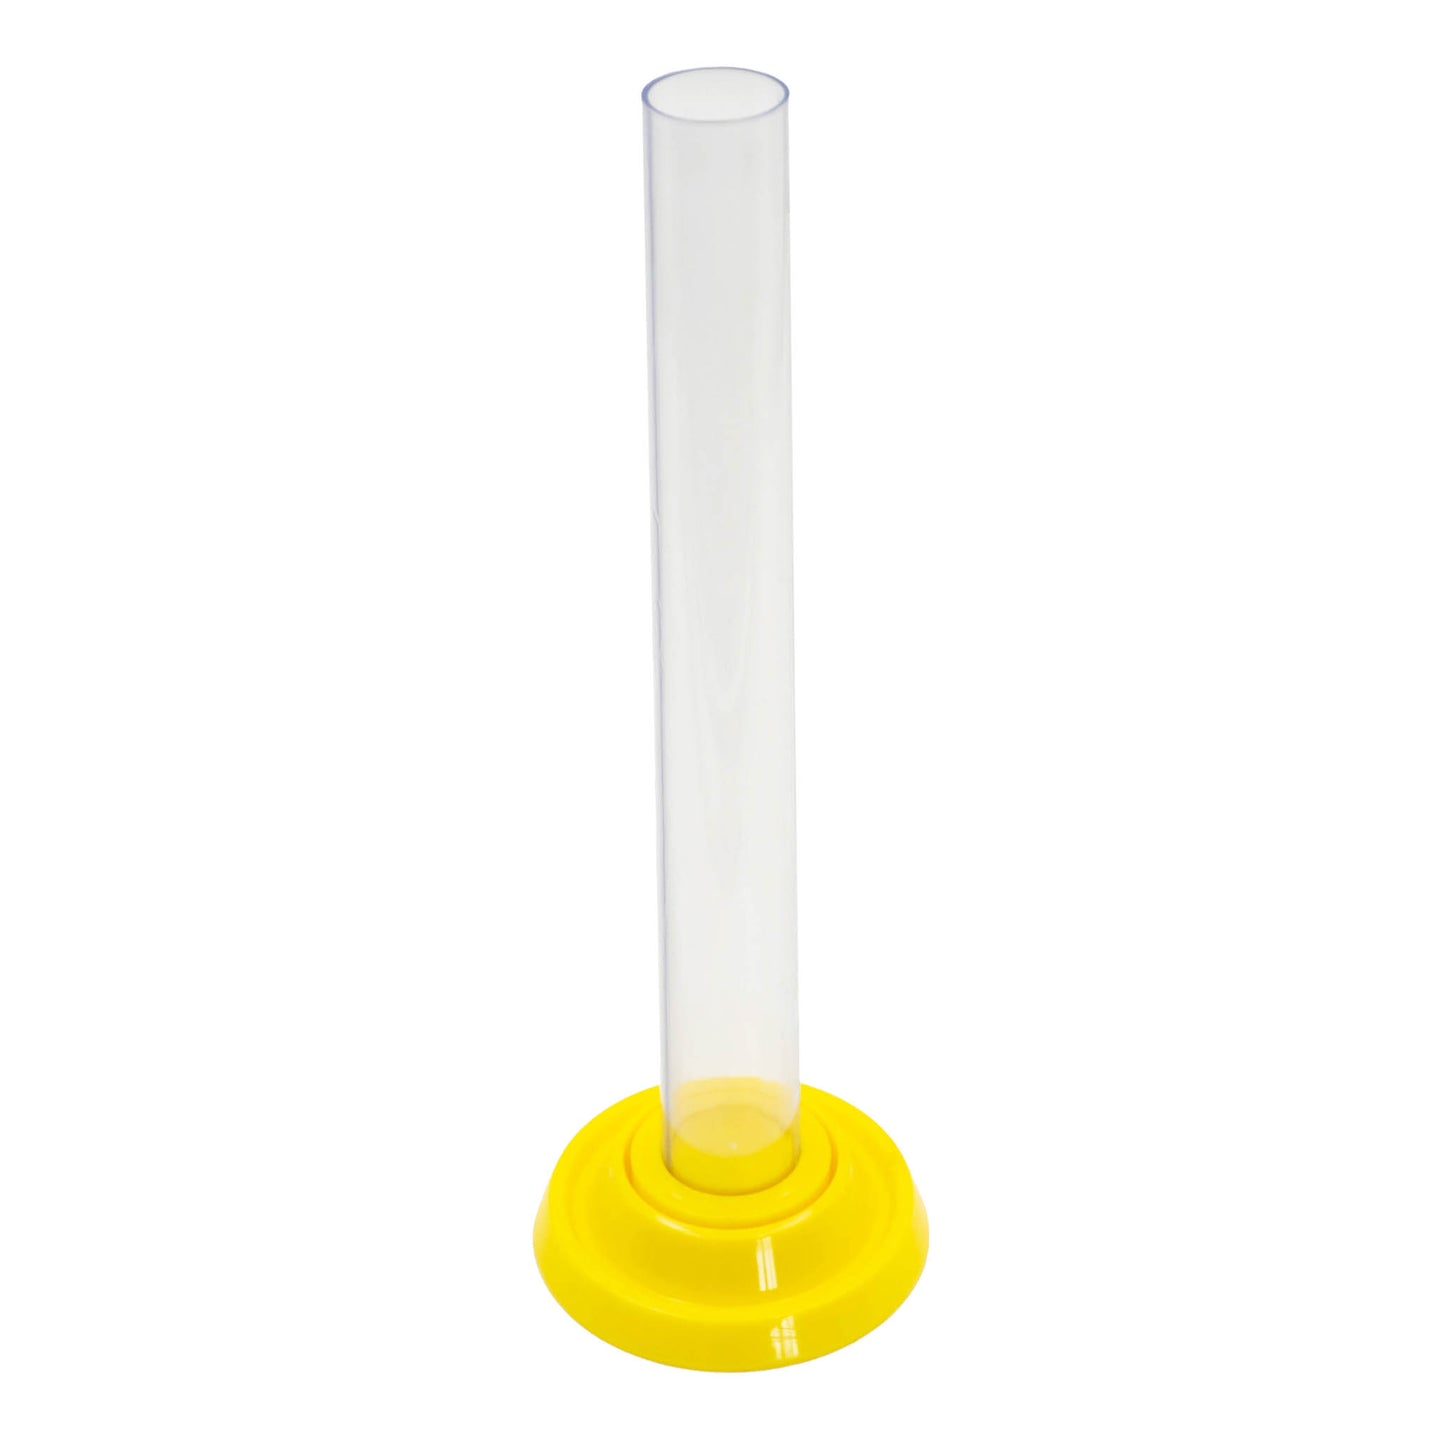 180ml food grade plastic test hydrometer. Used for testing samples of home brewed wine, beer and cider. 